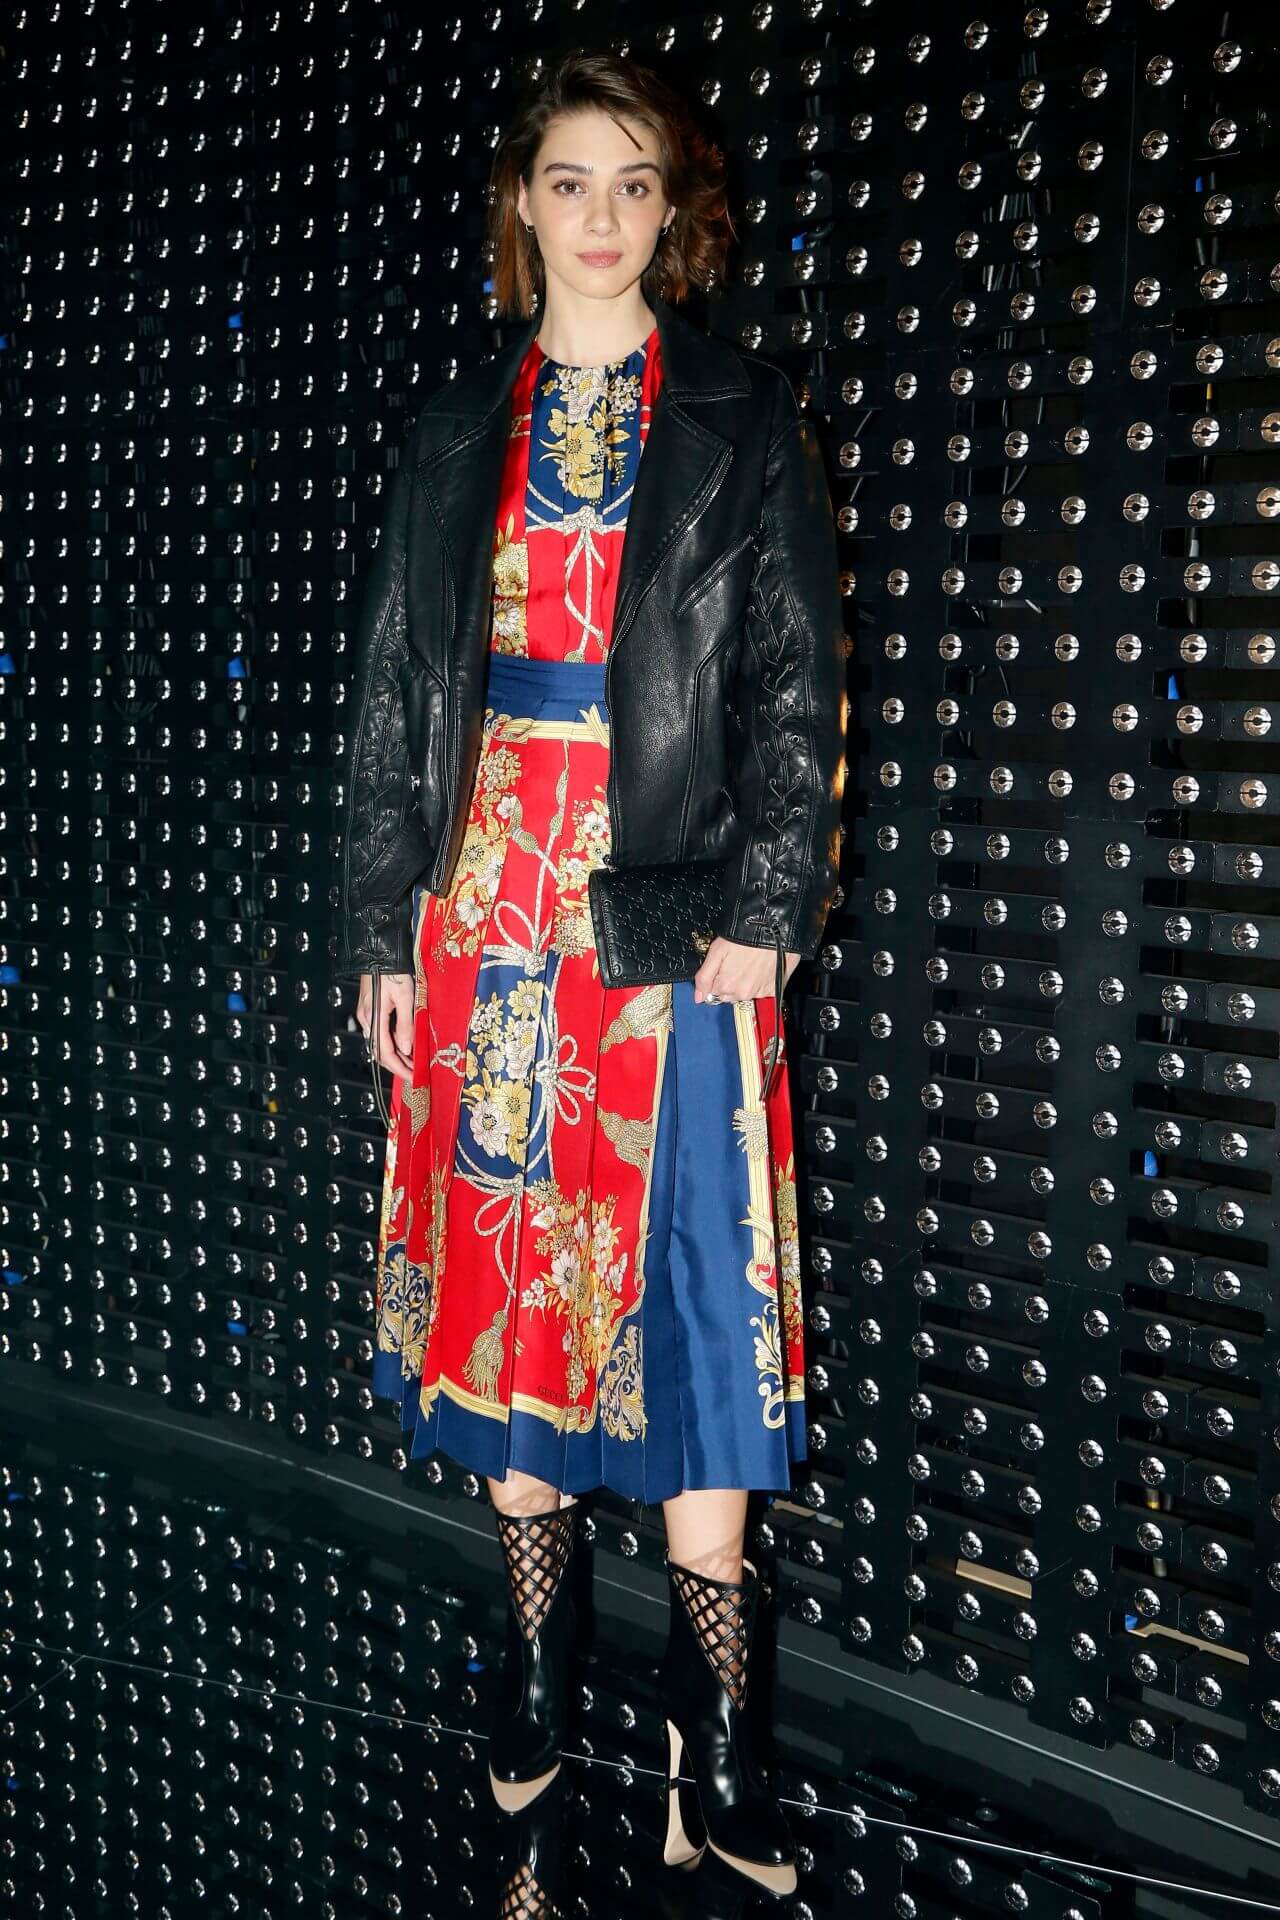 Emma Appleton In Printed Long Dress With Leather Jacket